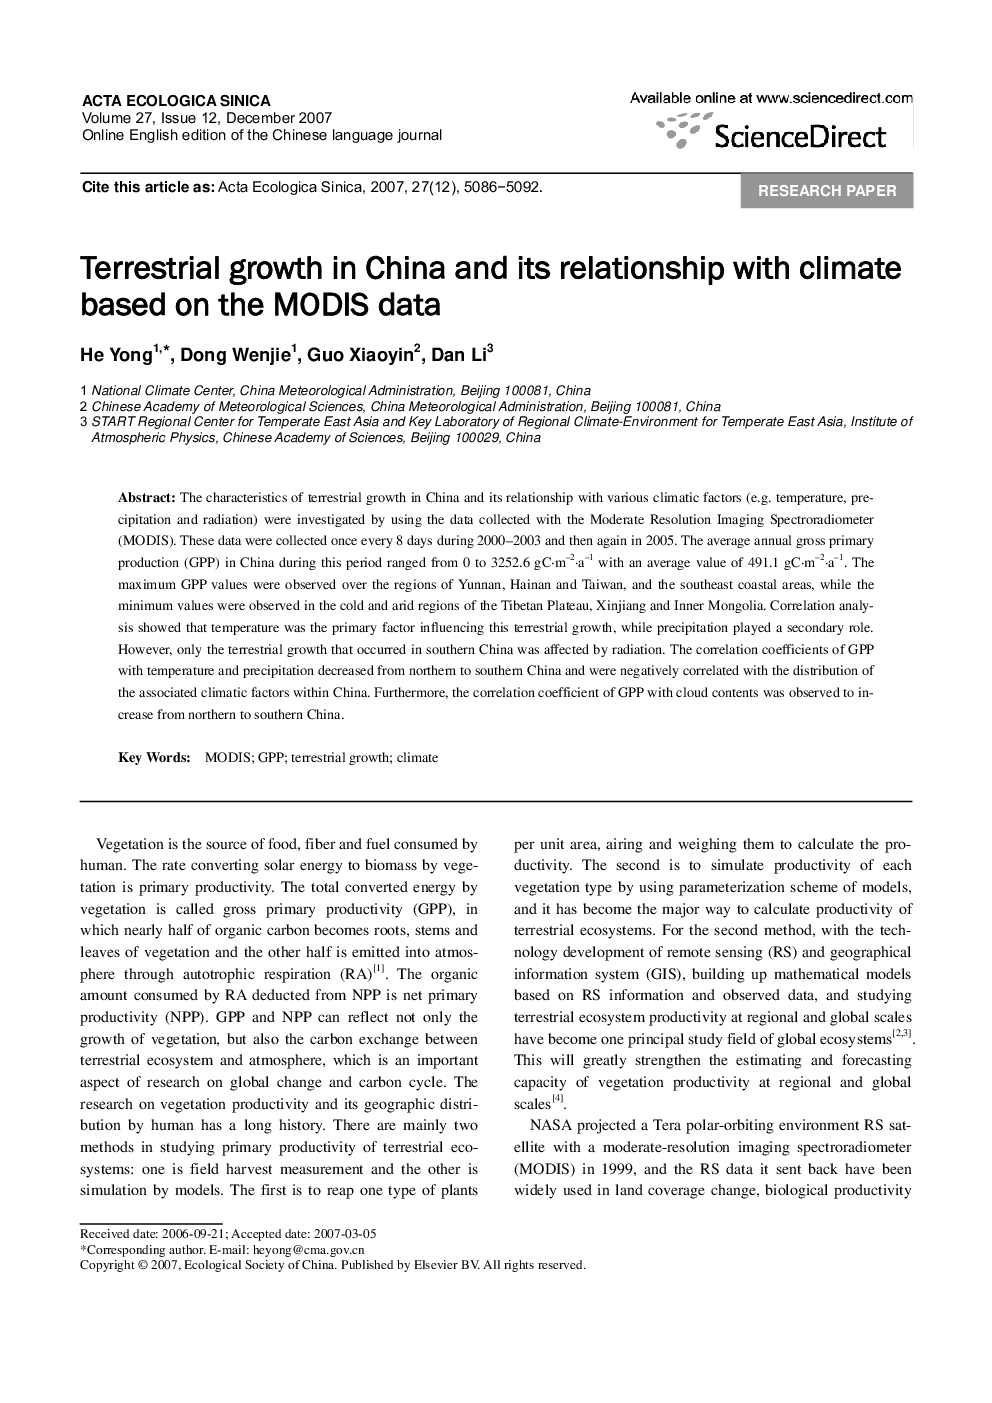 Terrestrial growth in China and its relationship with climate based on the MODIS data